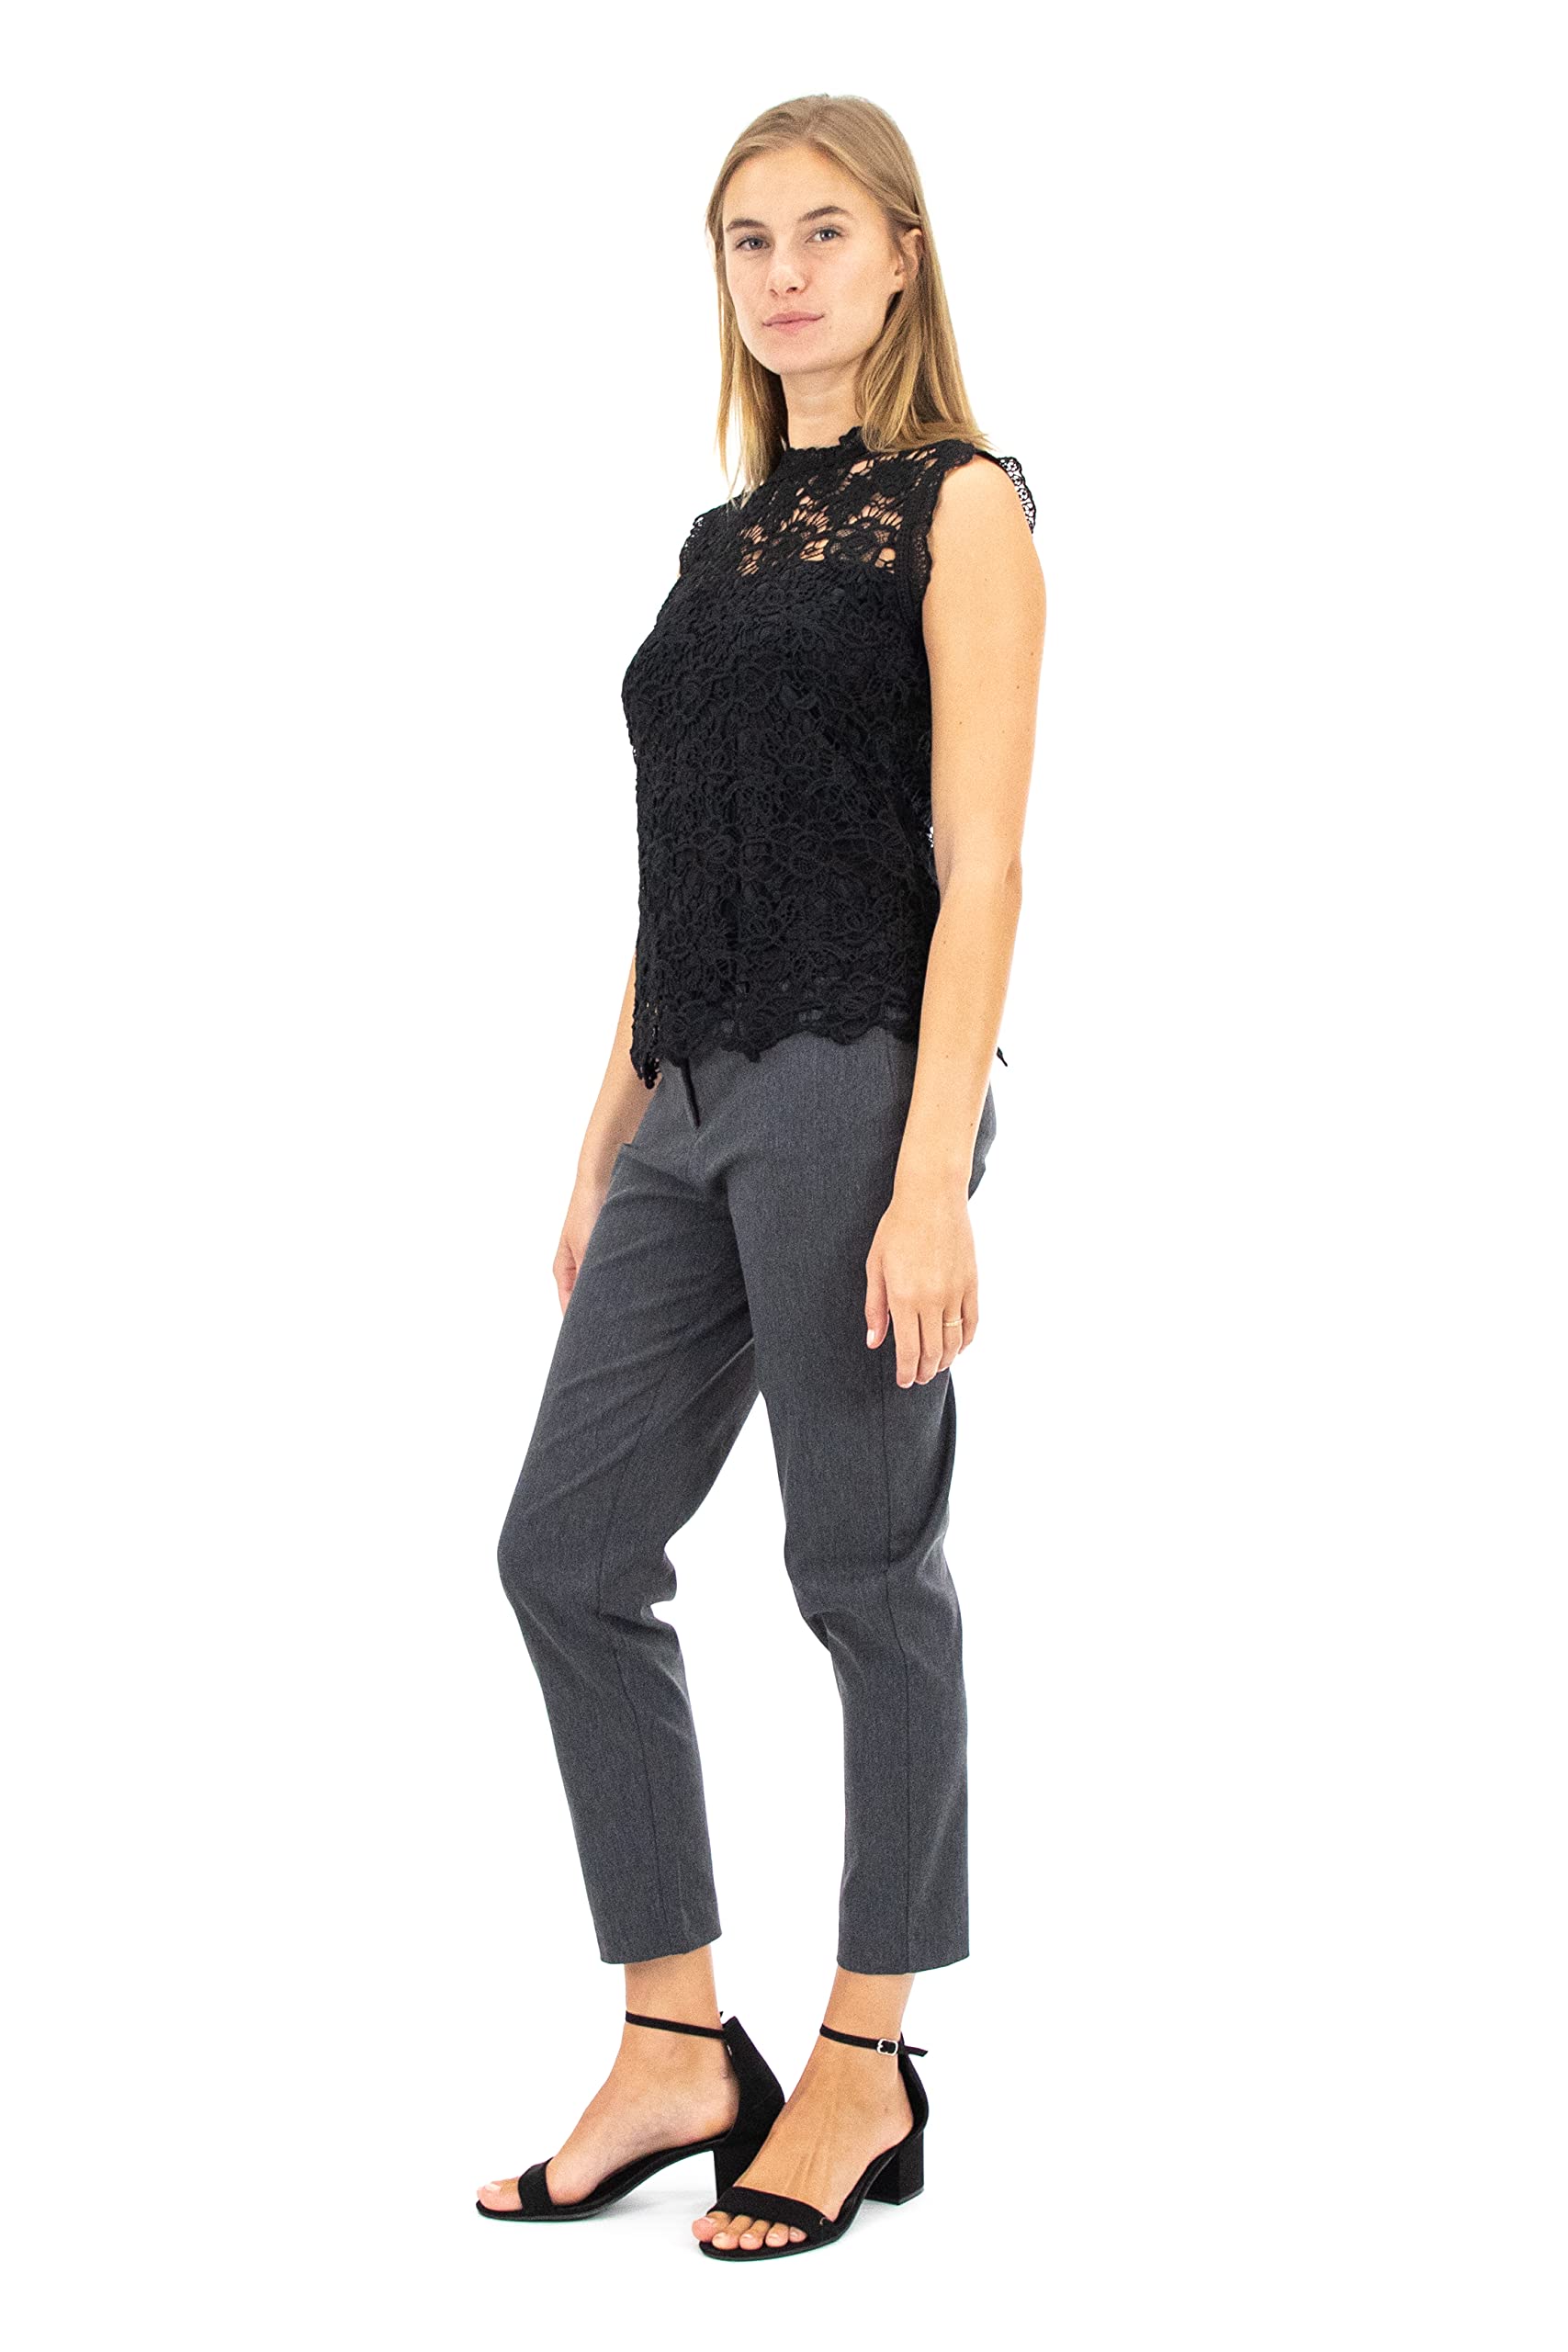 Nanette Nanette Lepore Women's Sleeveless Mockneck Embroidered Lace Top with Exposed Zipper